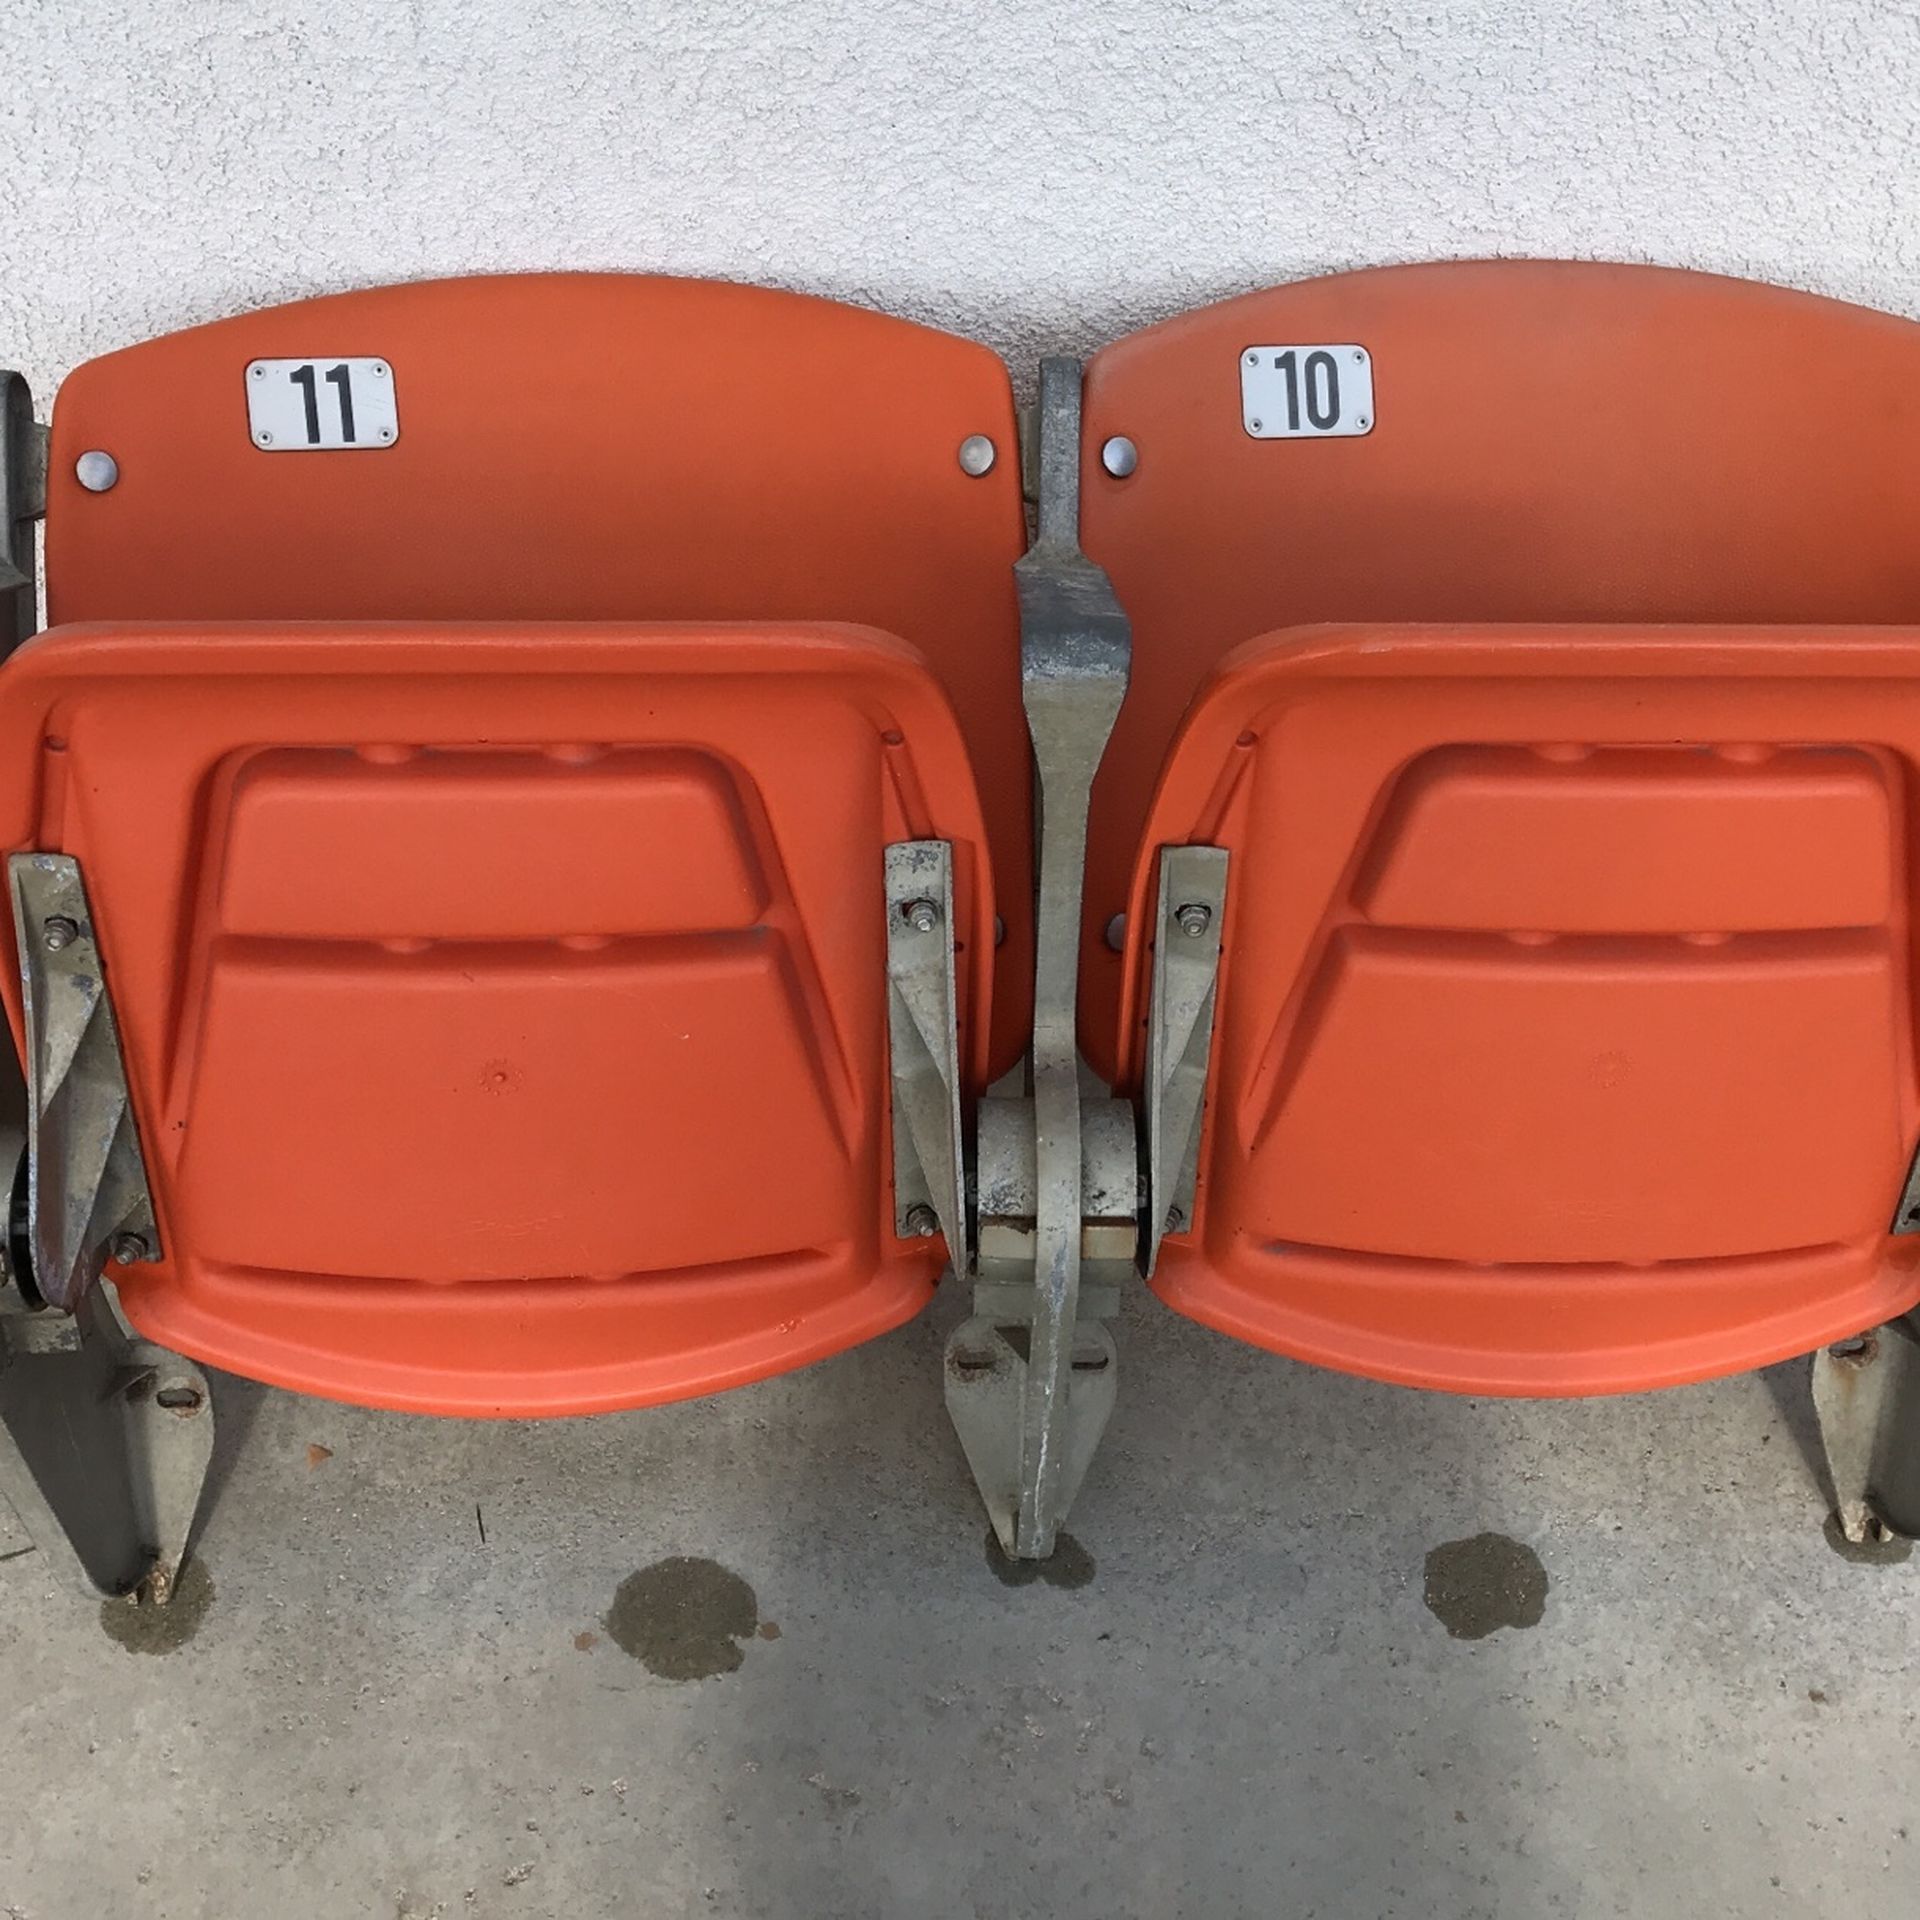 OFFICIAL SAN DIEGO PADRES/SAN DIEGO CHARGERS QUALCOMM STADIUM SEATS